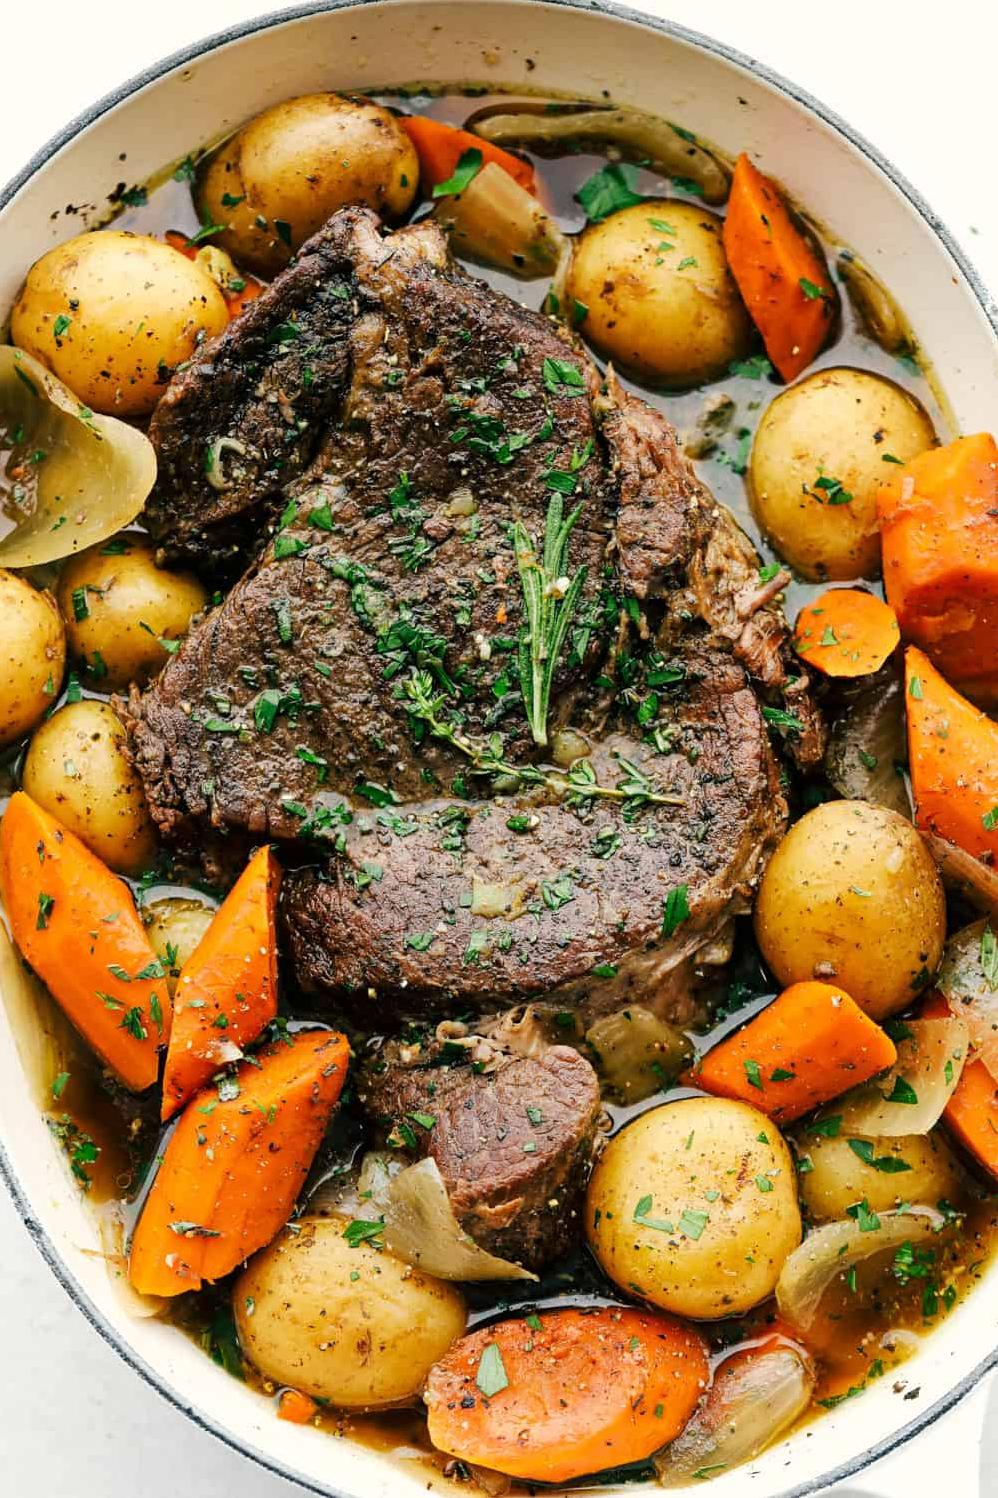  Tender, juicy and flavorful: the perfect combination for a pot roast!